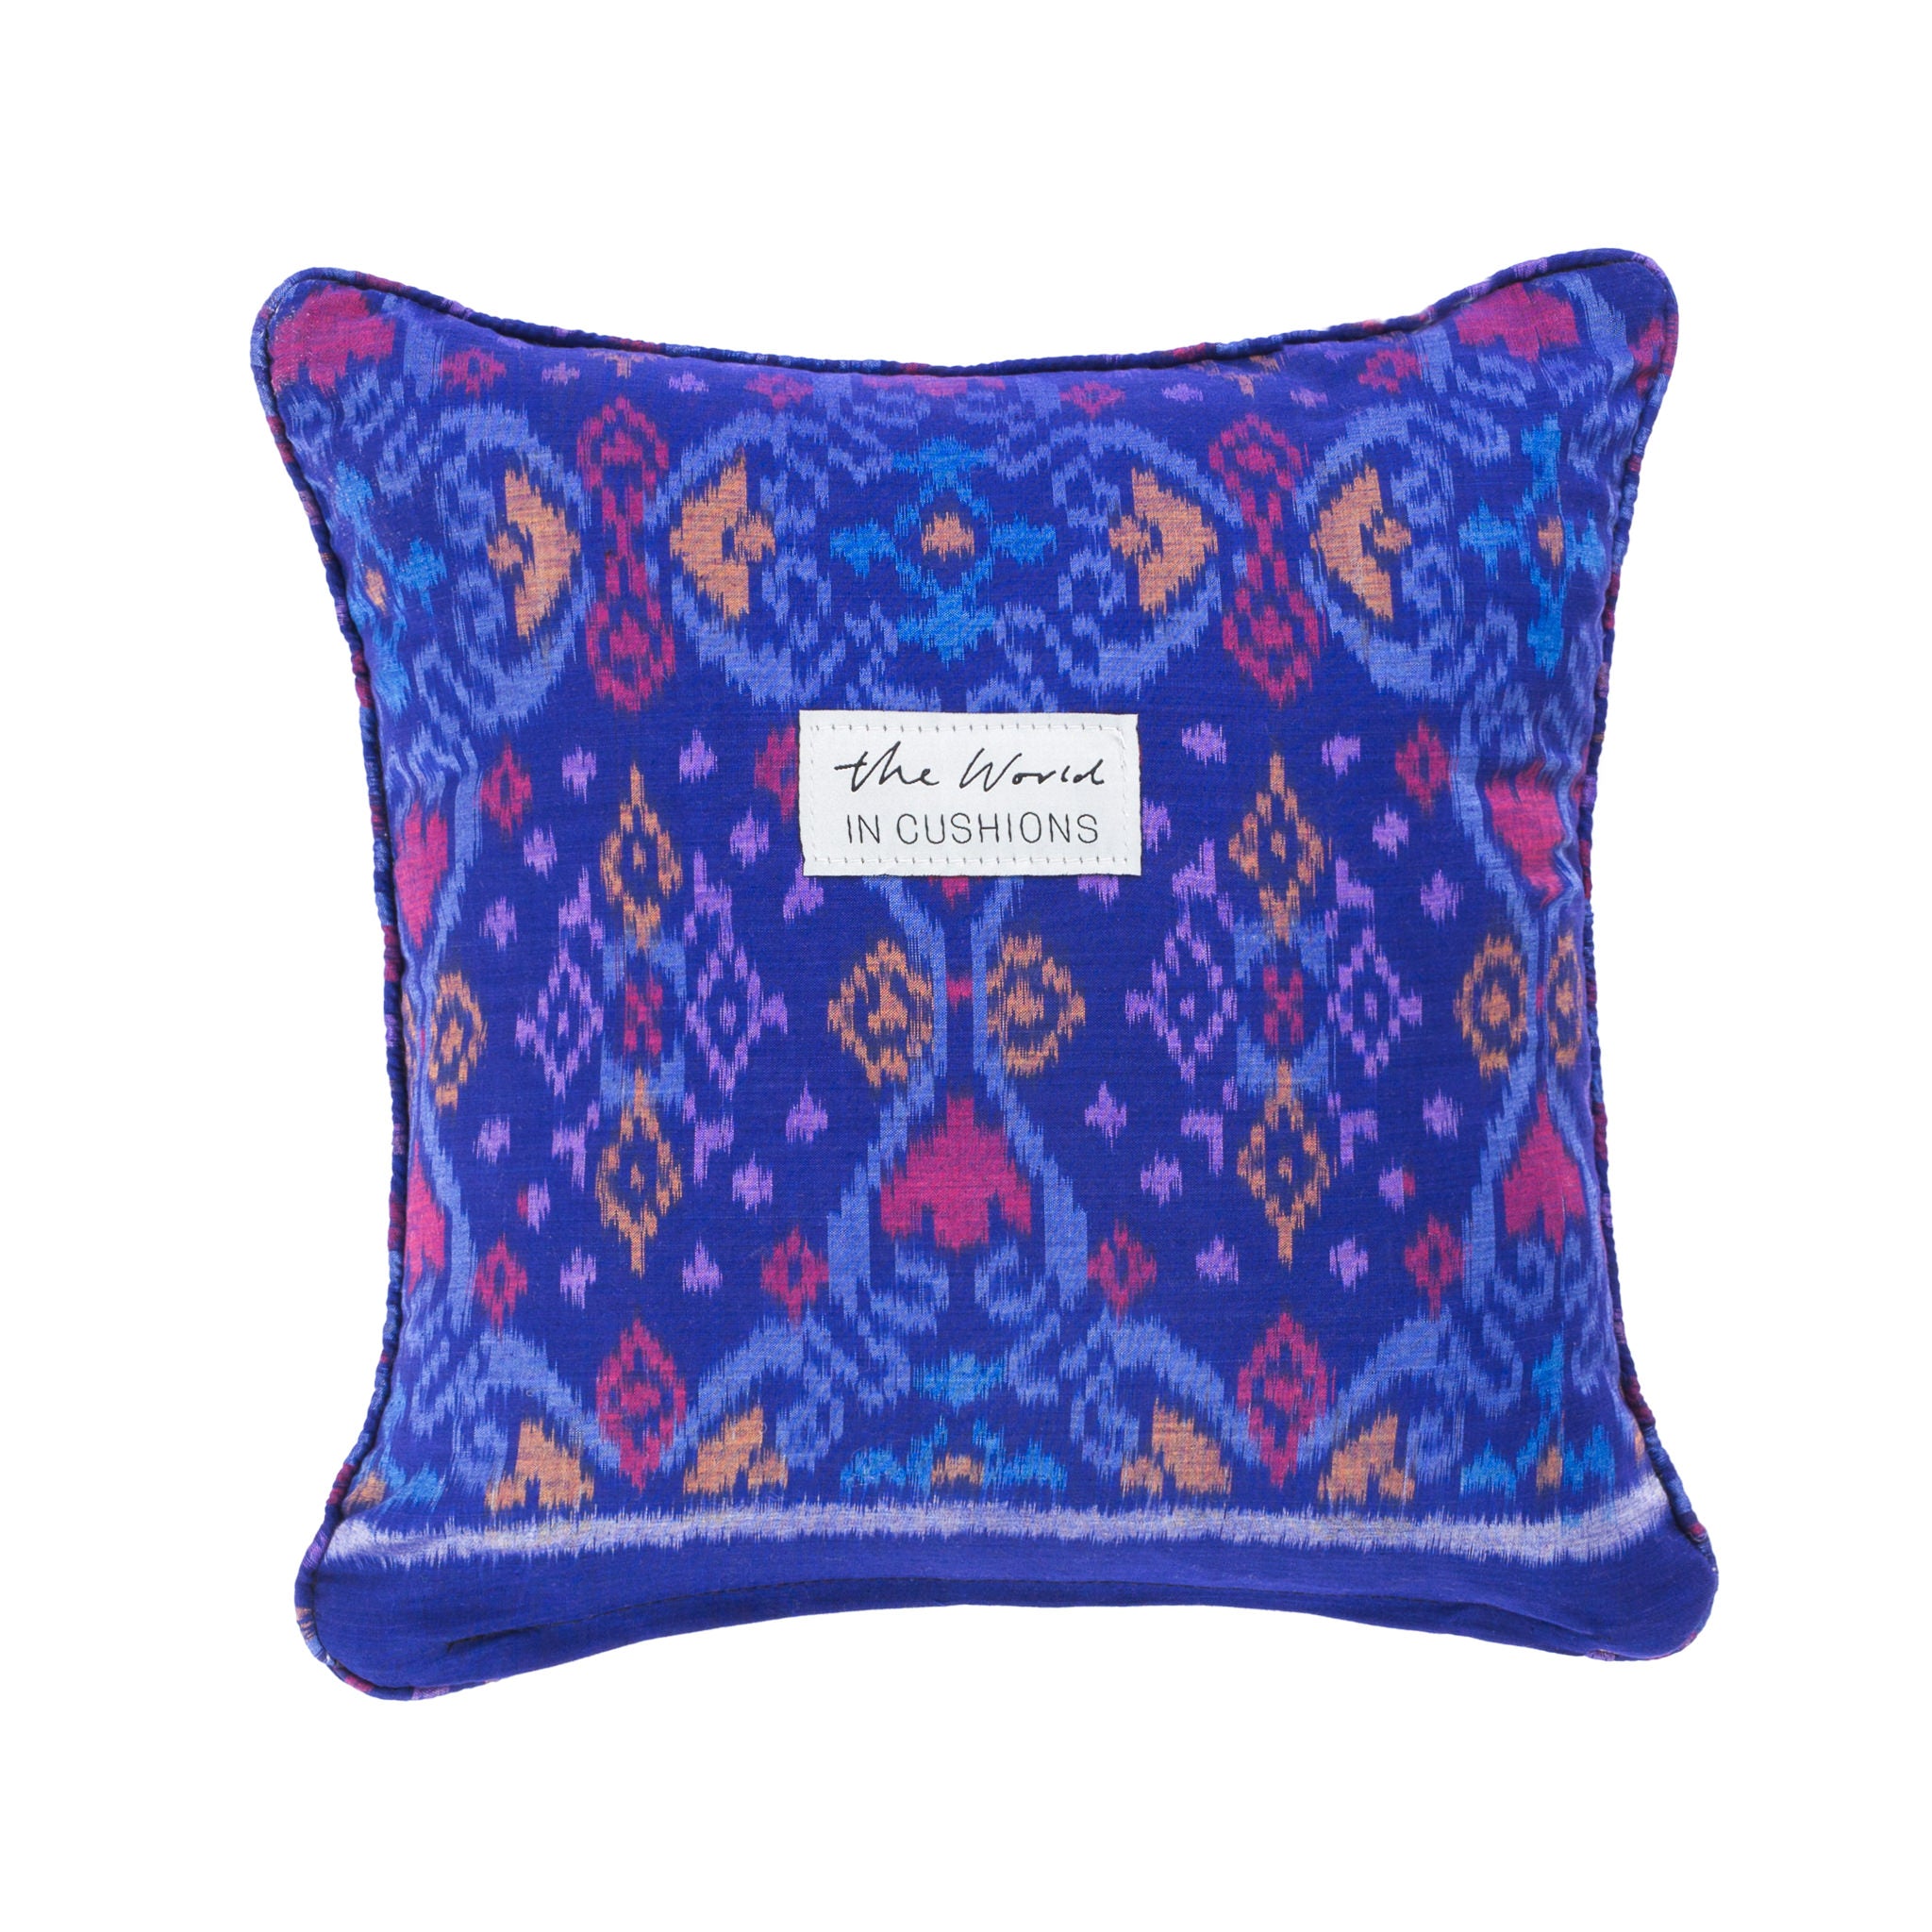 Royal Blue, Purple, Red and Peach Ikat Square Scatter Cushion from Bali, Indonesia - BACK